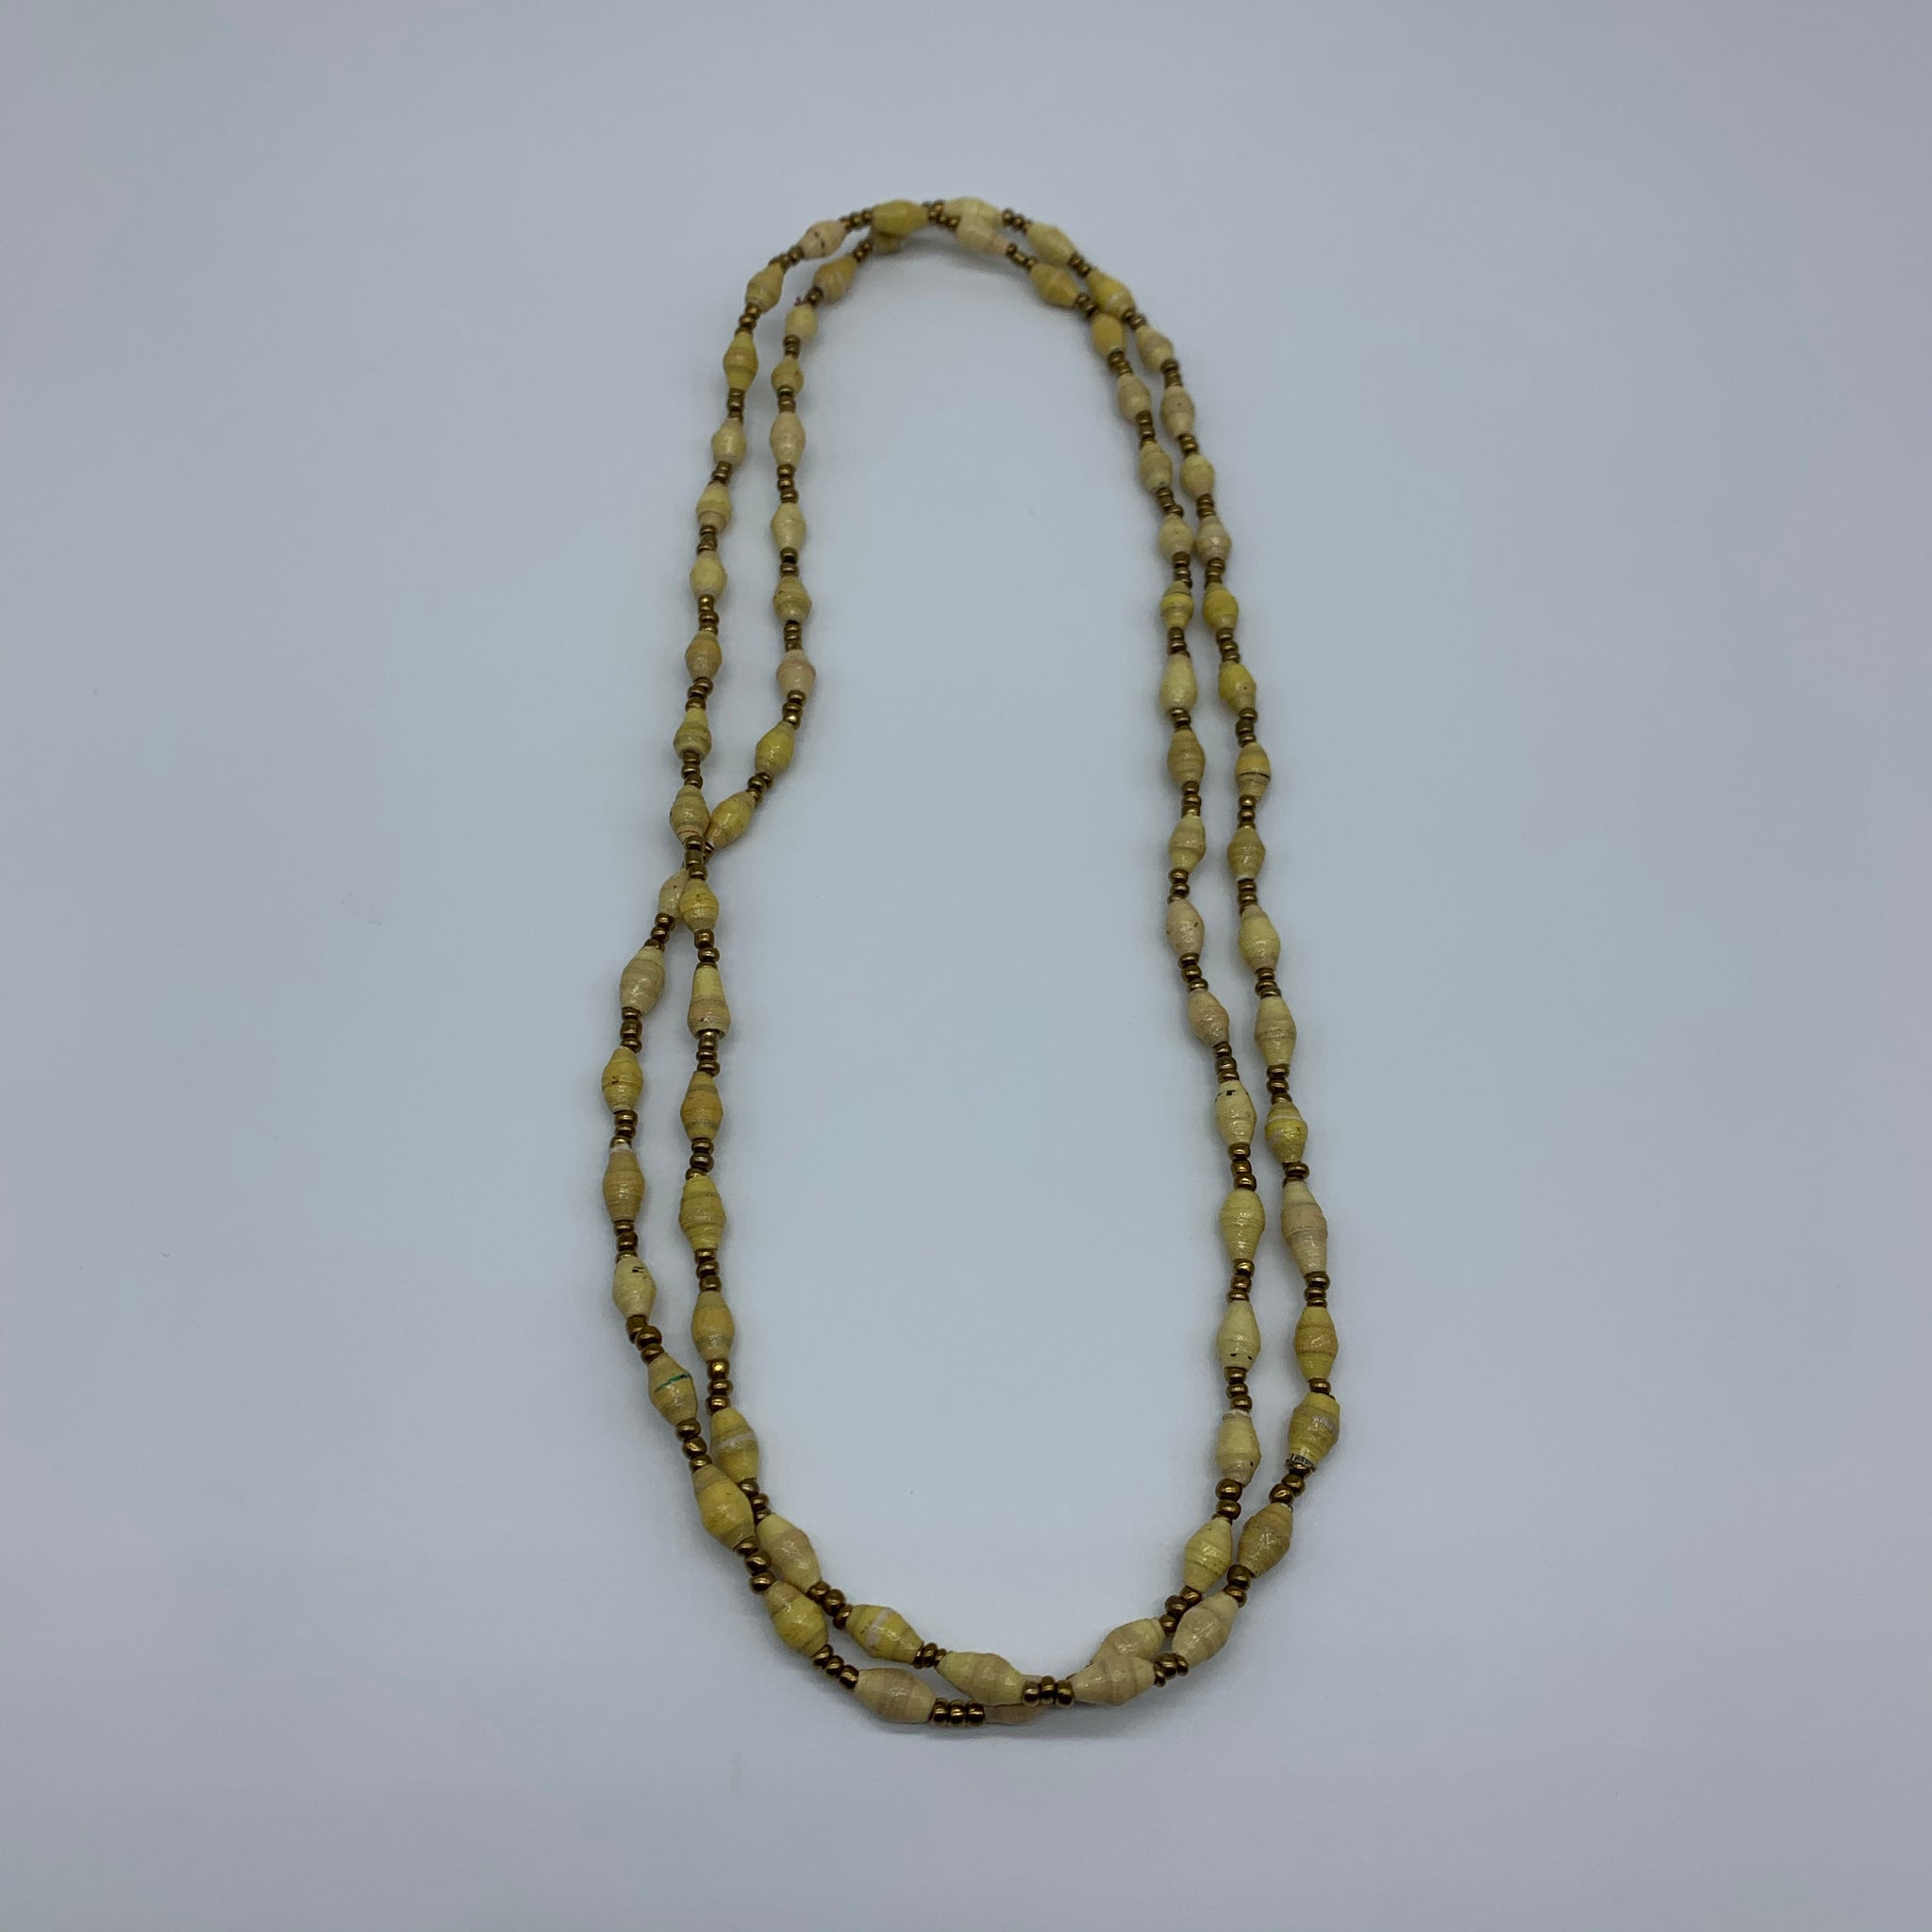 Paper Necklace with Beads-Yellow Variation